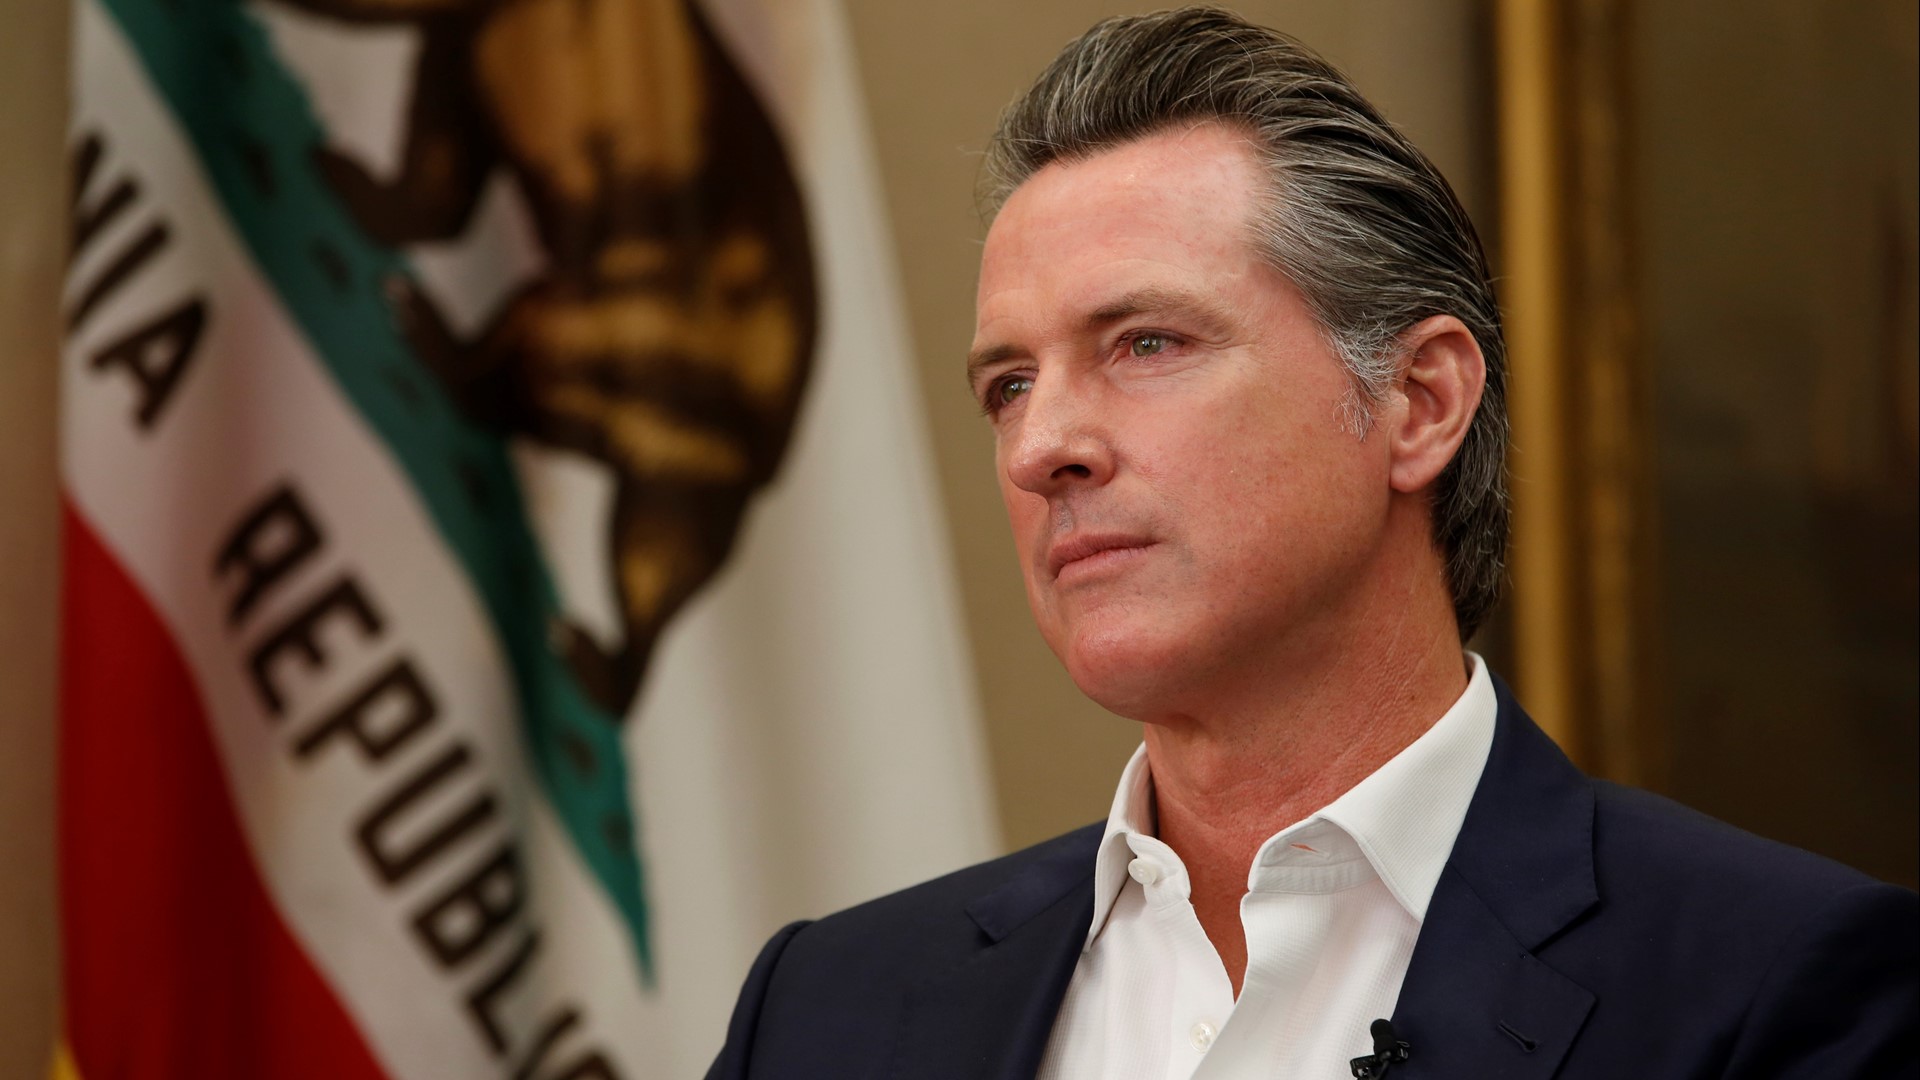 Governor Gavin Newsom on Friday threatened a possible takeover of PG&E unless it can emerge from bankruptcy ahead of next year's wildfire season with a plan.